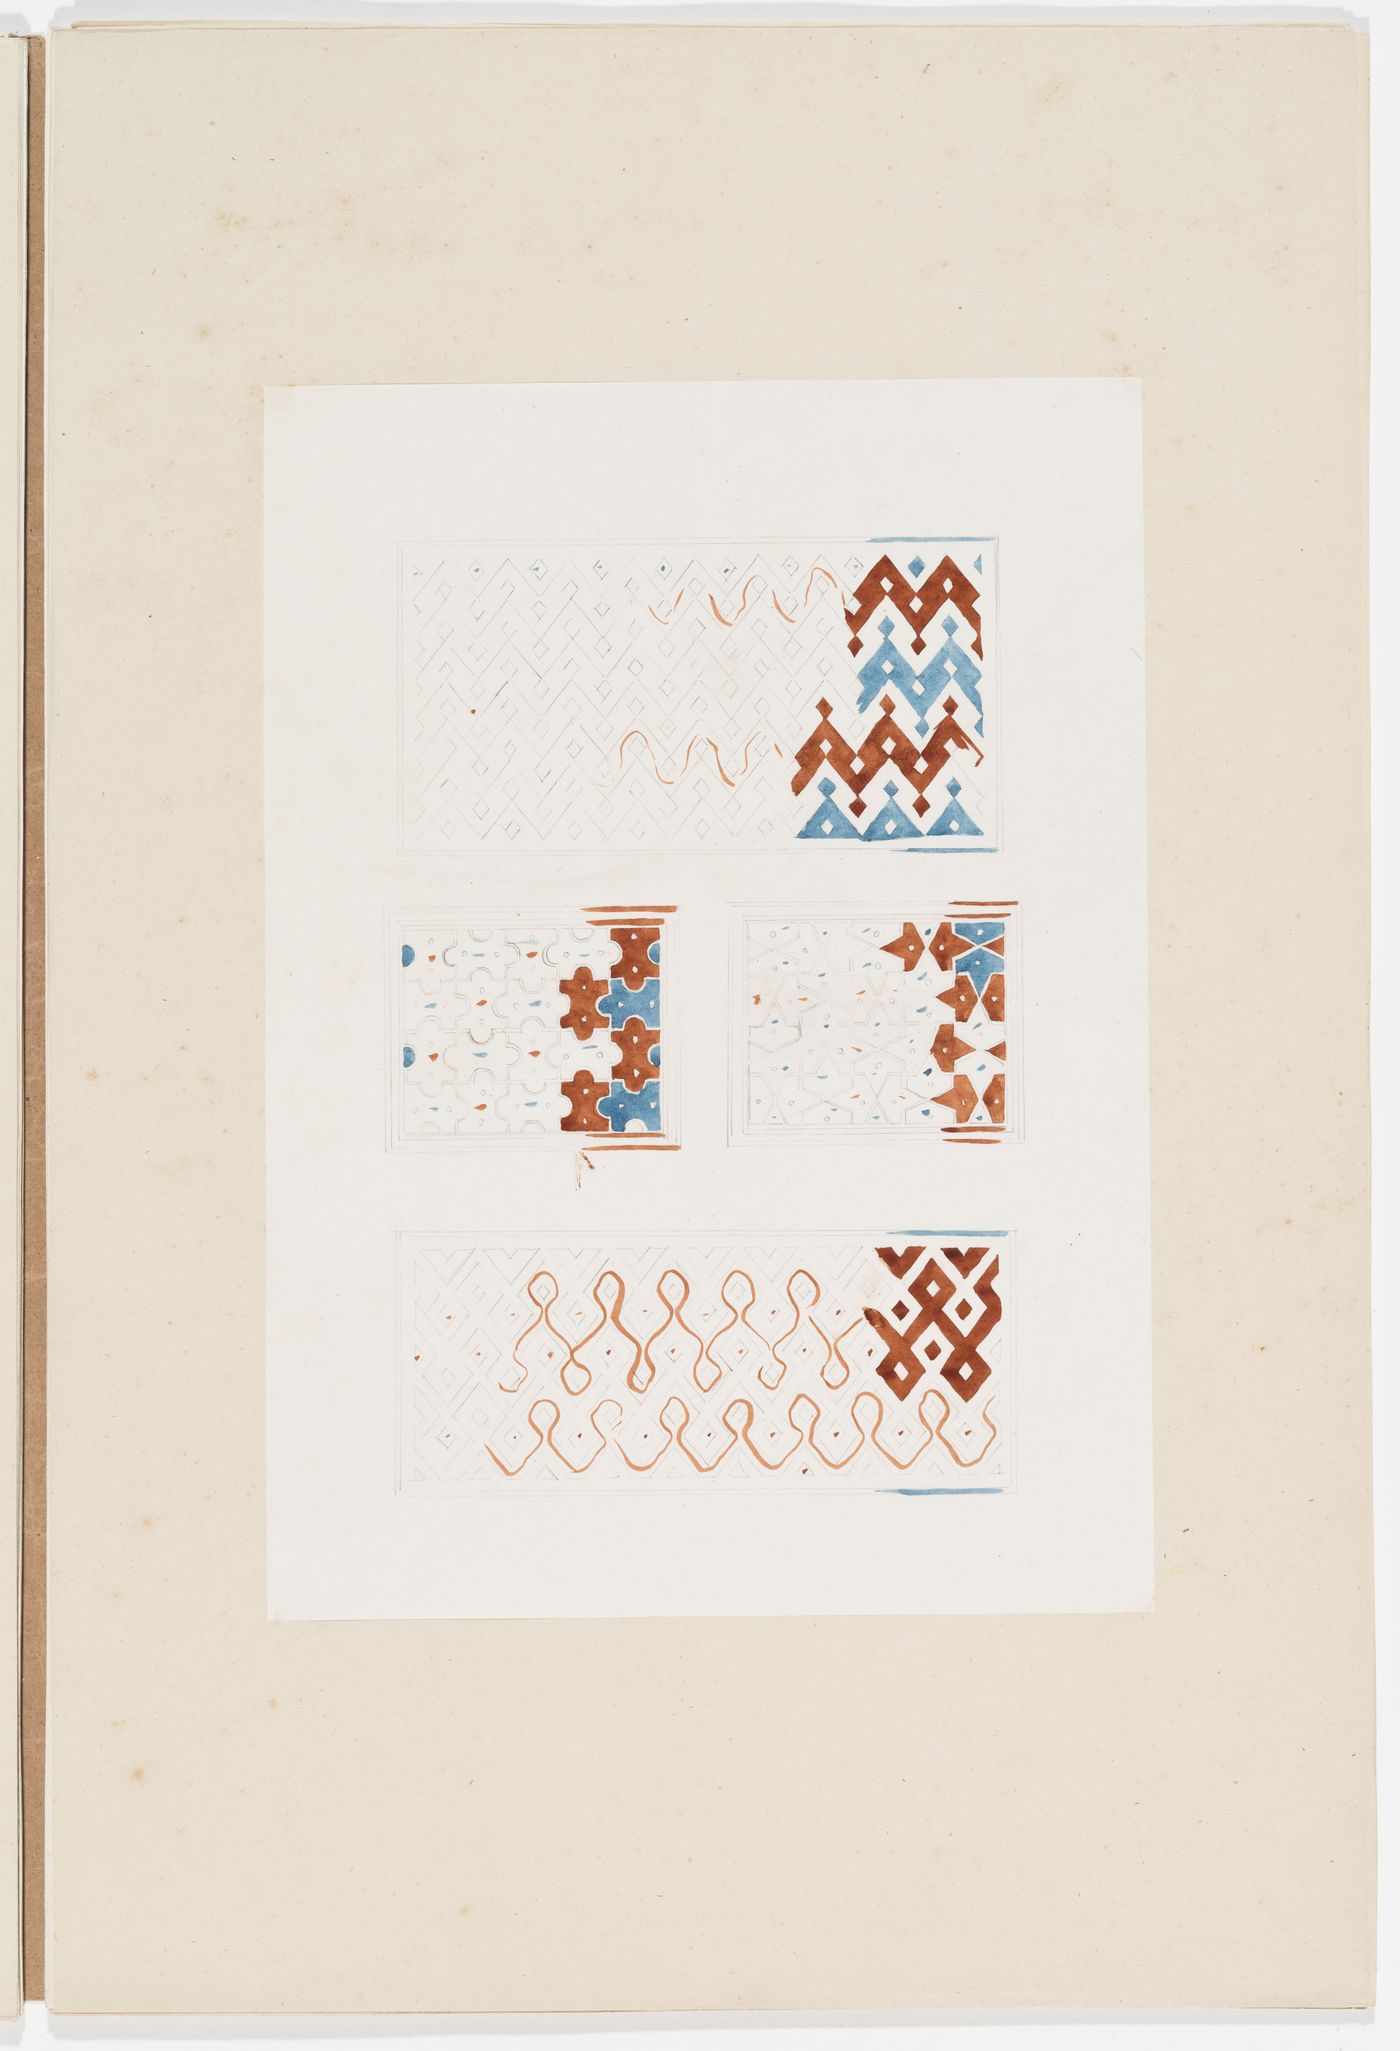 Ornament drawing of four panels decorated with geometric patterns and lines